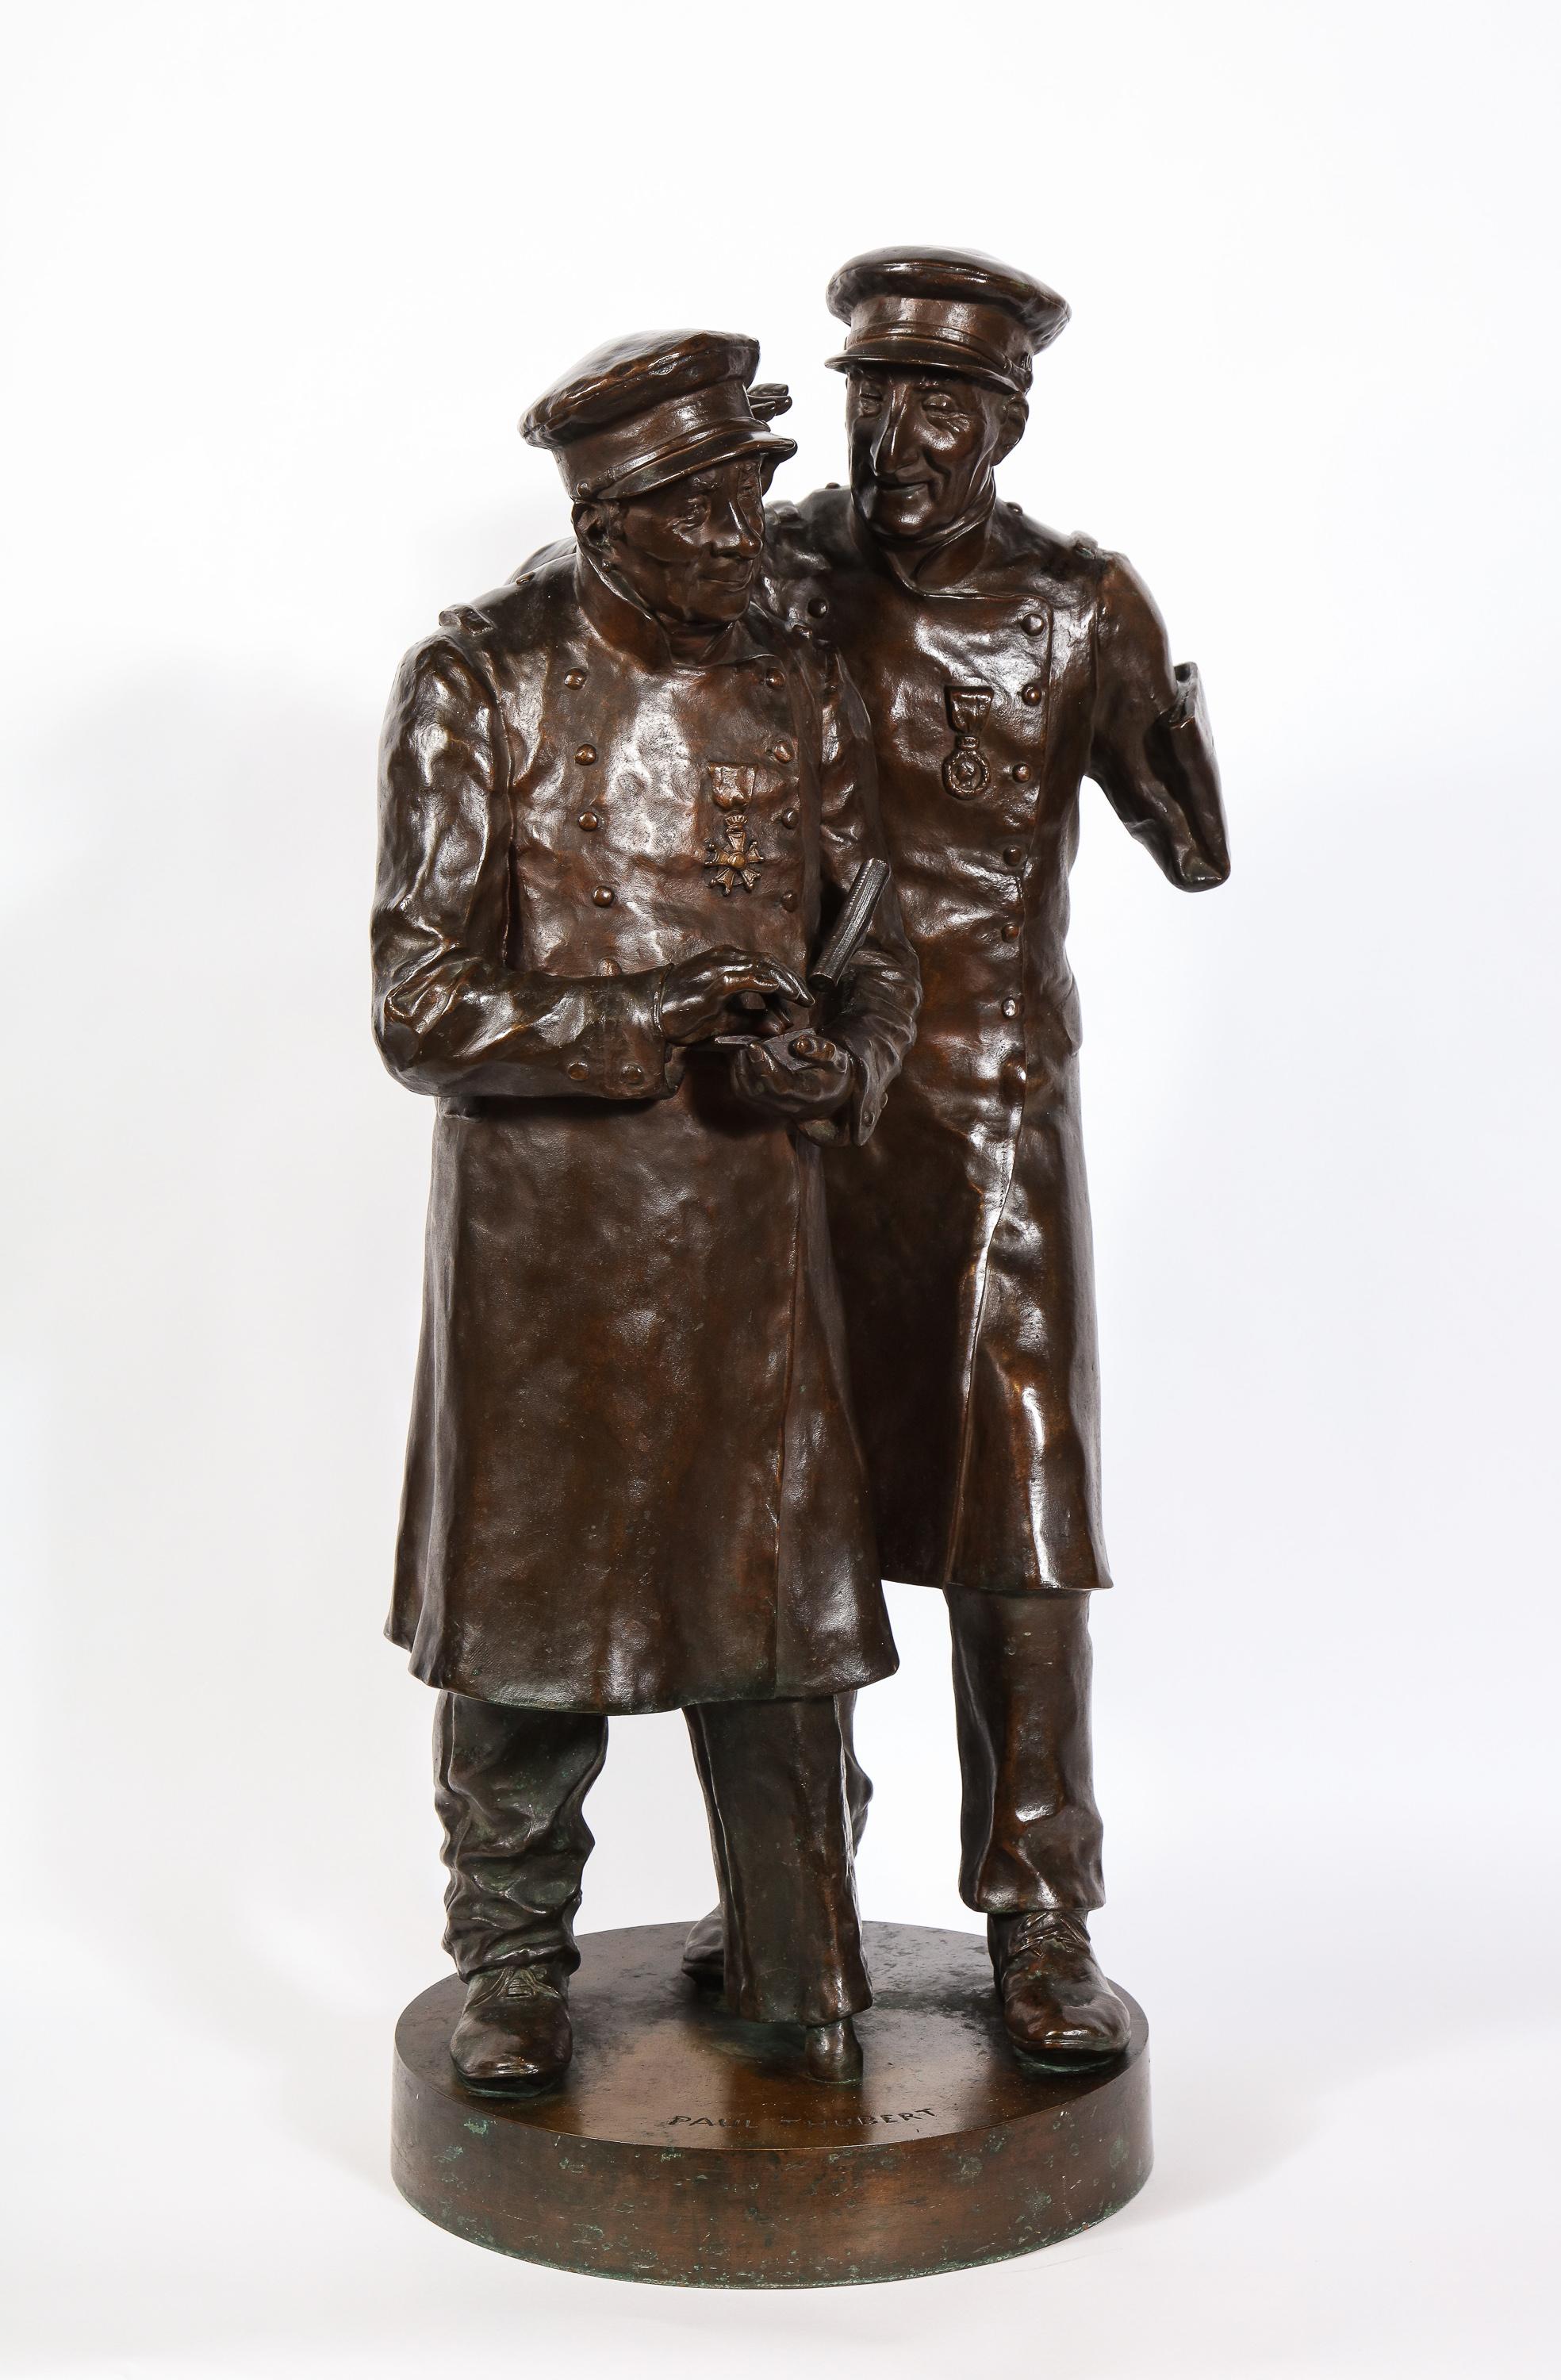 Paul Thubert 
(English, 19th Century) 

A large patinated bronze sculpture statue of two war veterans with uniforms and badges. Each with amputation injuries. One with an amputated arm, the other with an amputated leg. 

Very unusual bronze